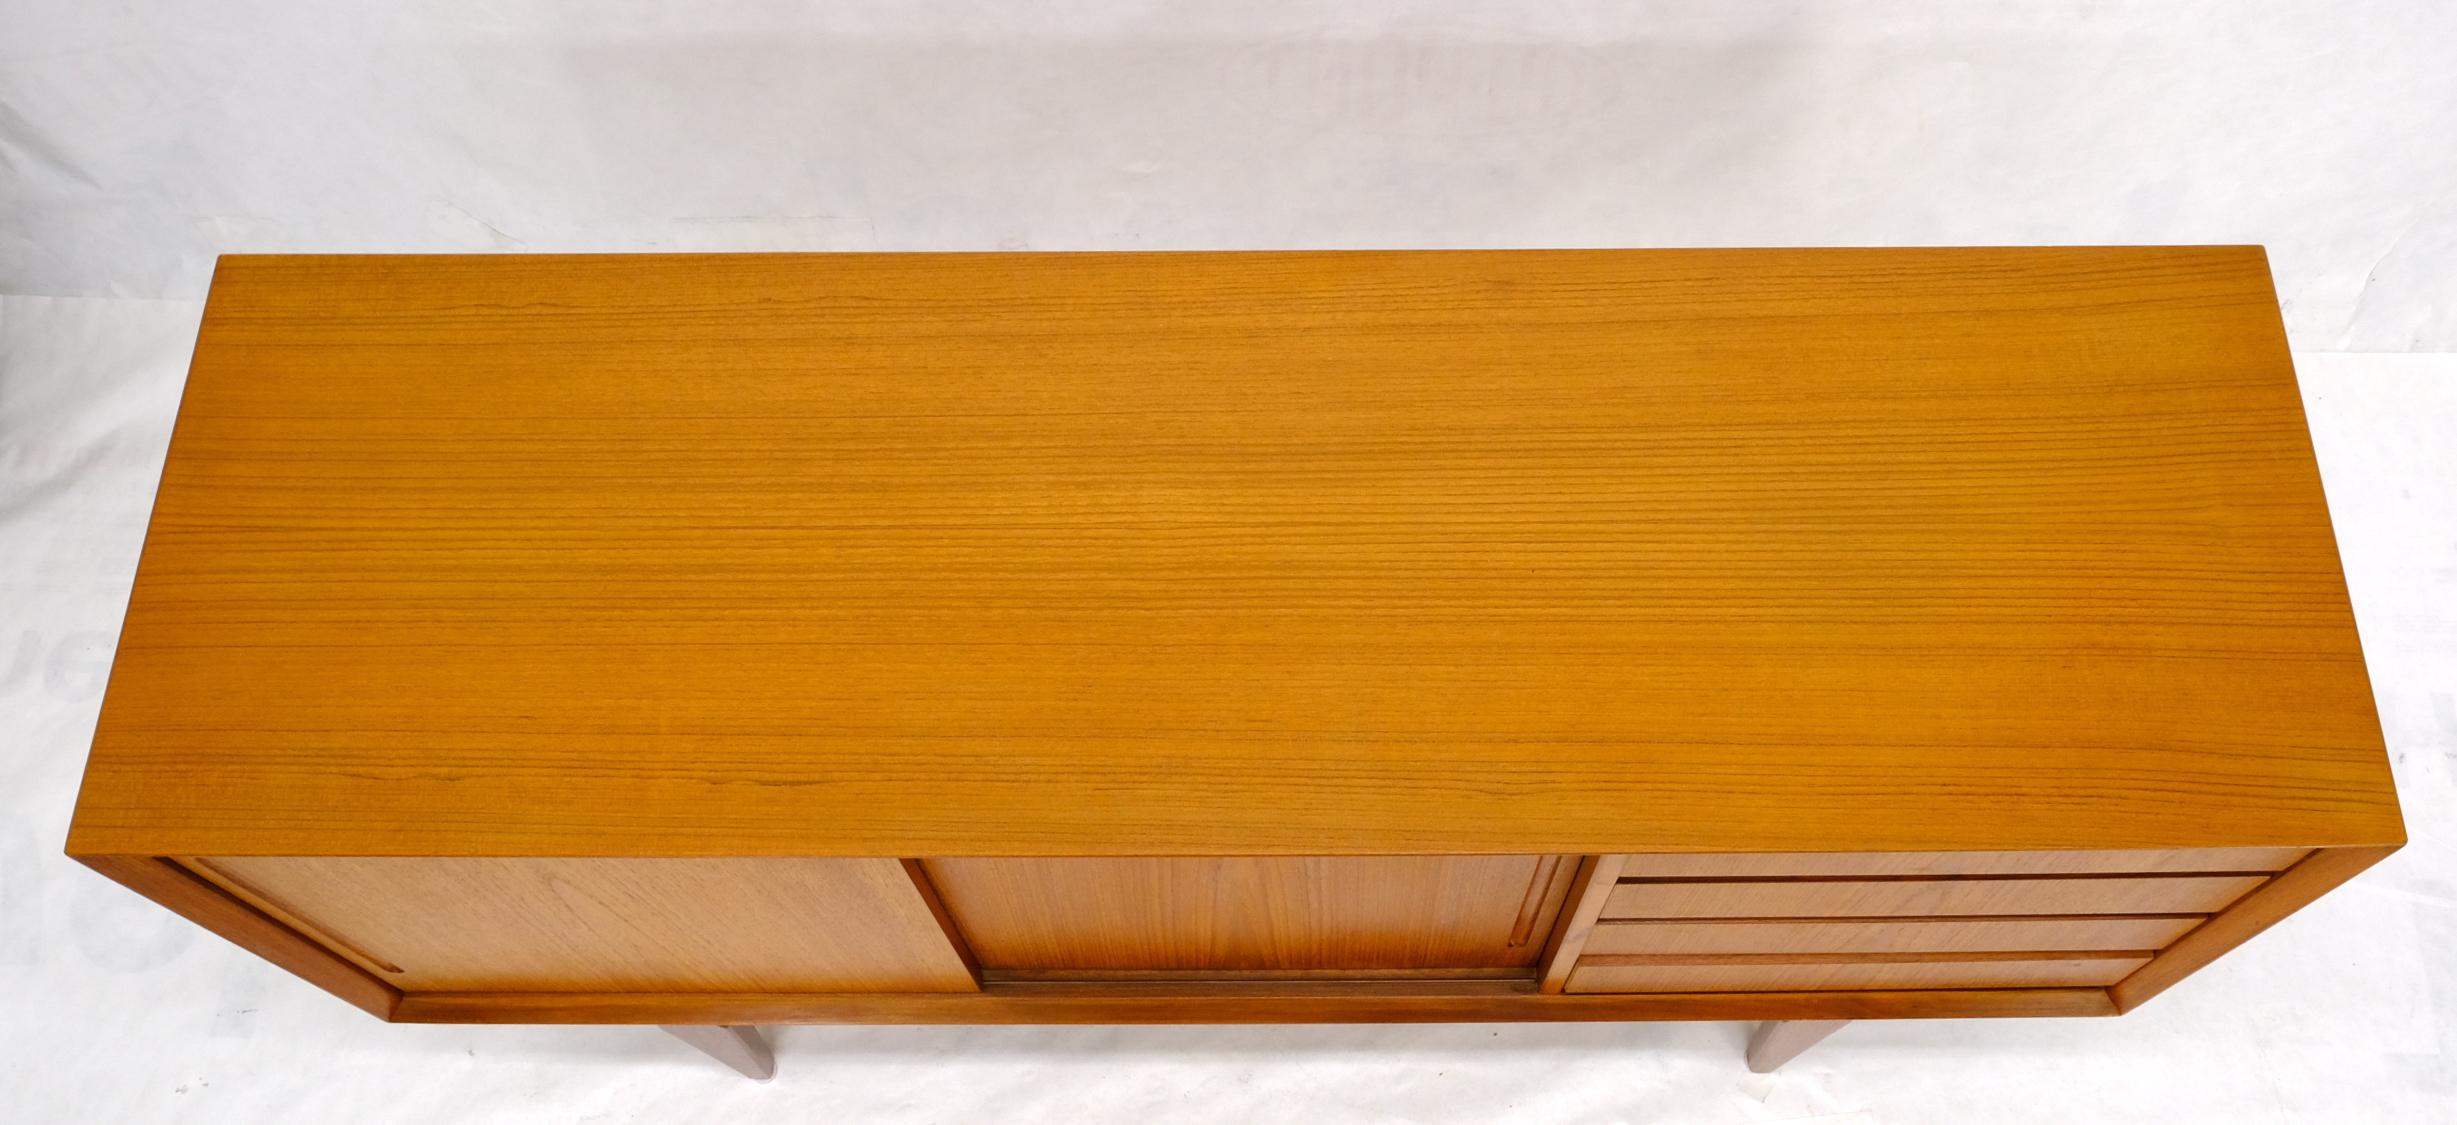 Danish Mid-Century Modern Teak Low 4 Drawers Sliding Doors Compartment Credenza For Sale 11